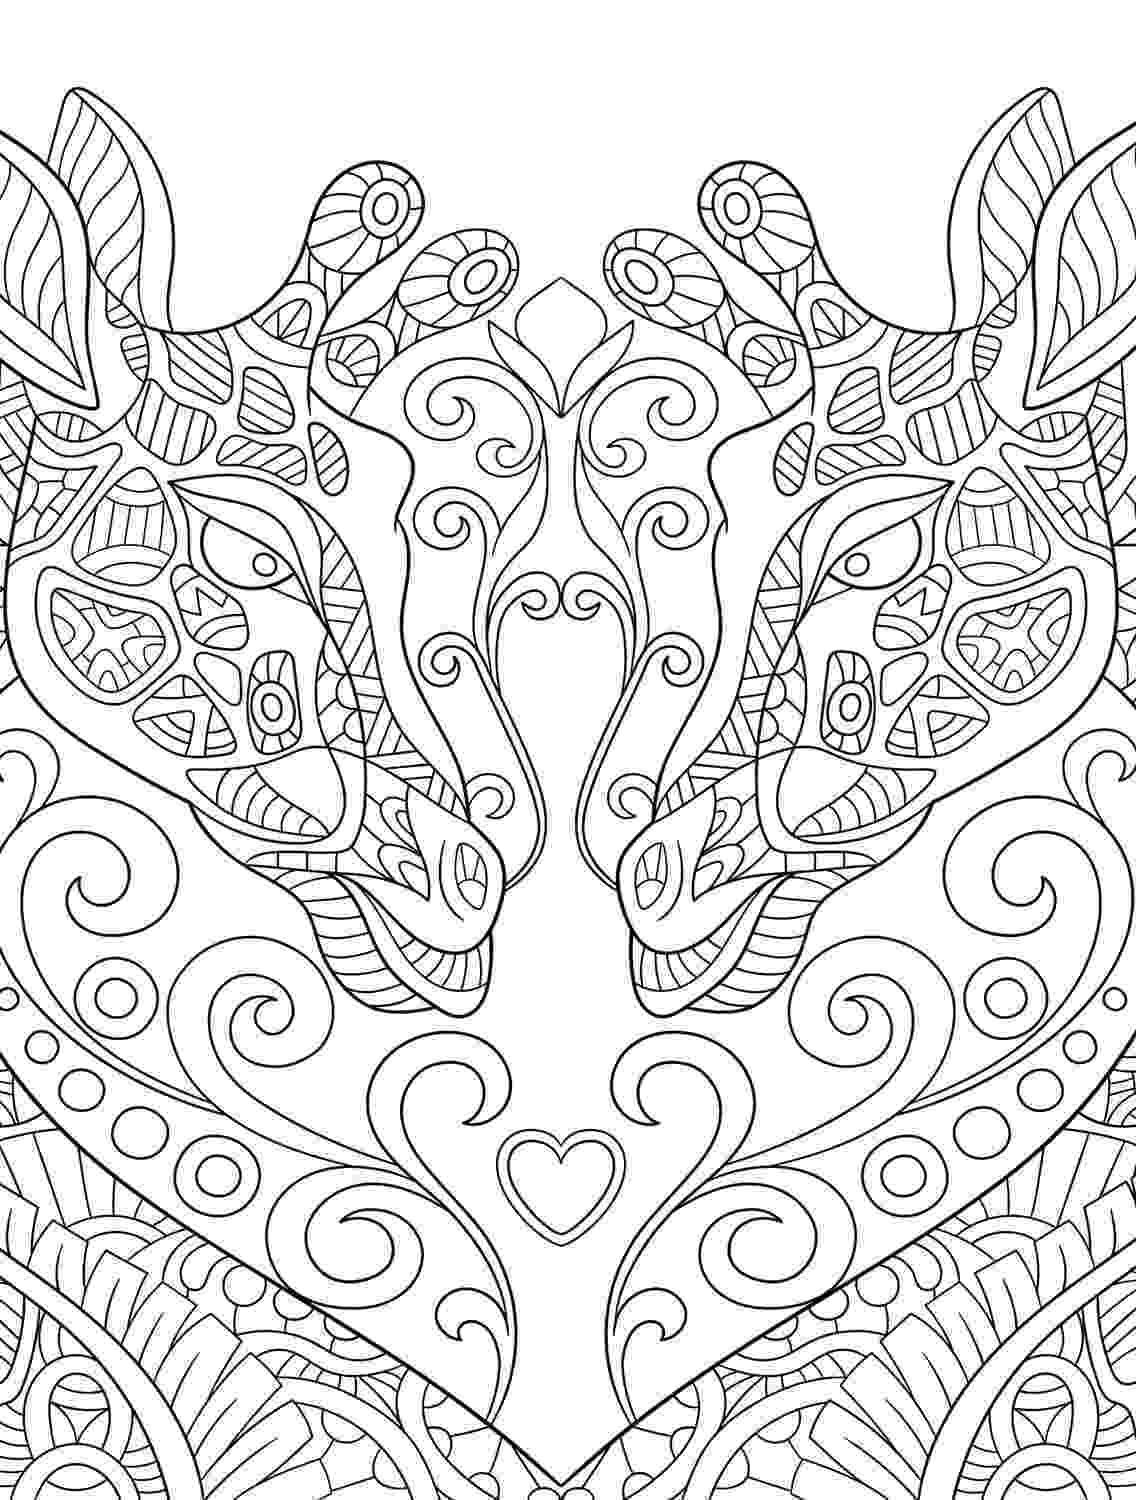 coloring pages that you can print for free free coloring pages that you can print coloring pages free can that pages coloring print for you 